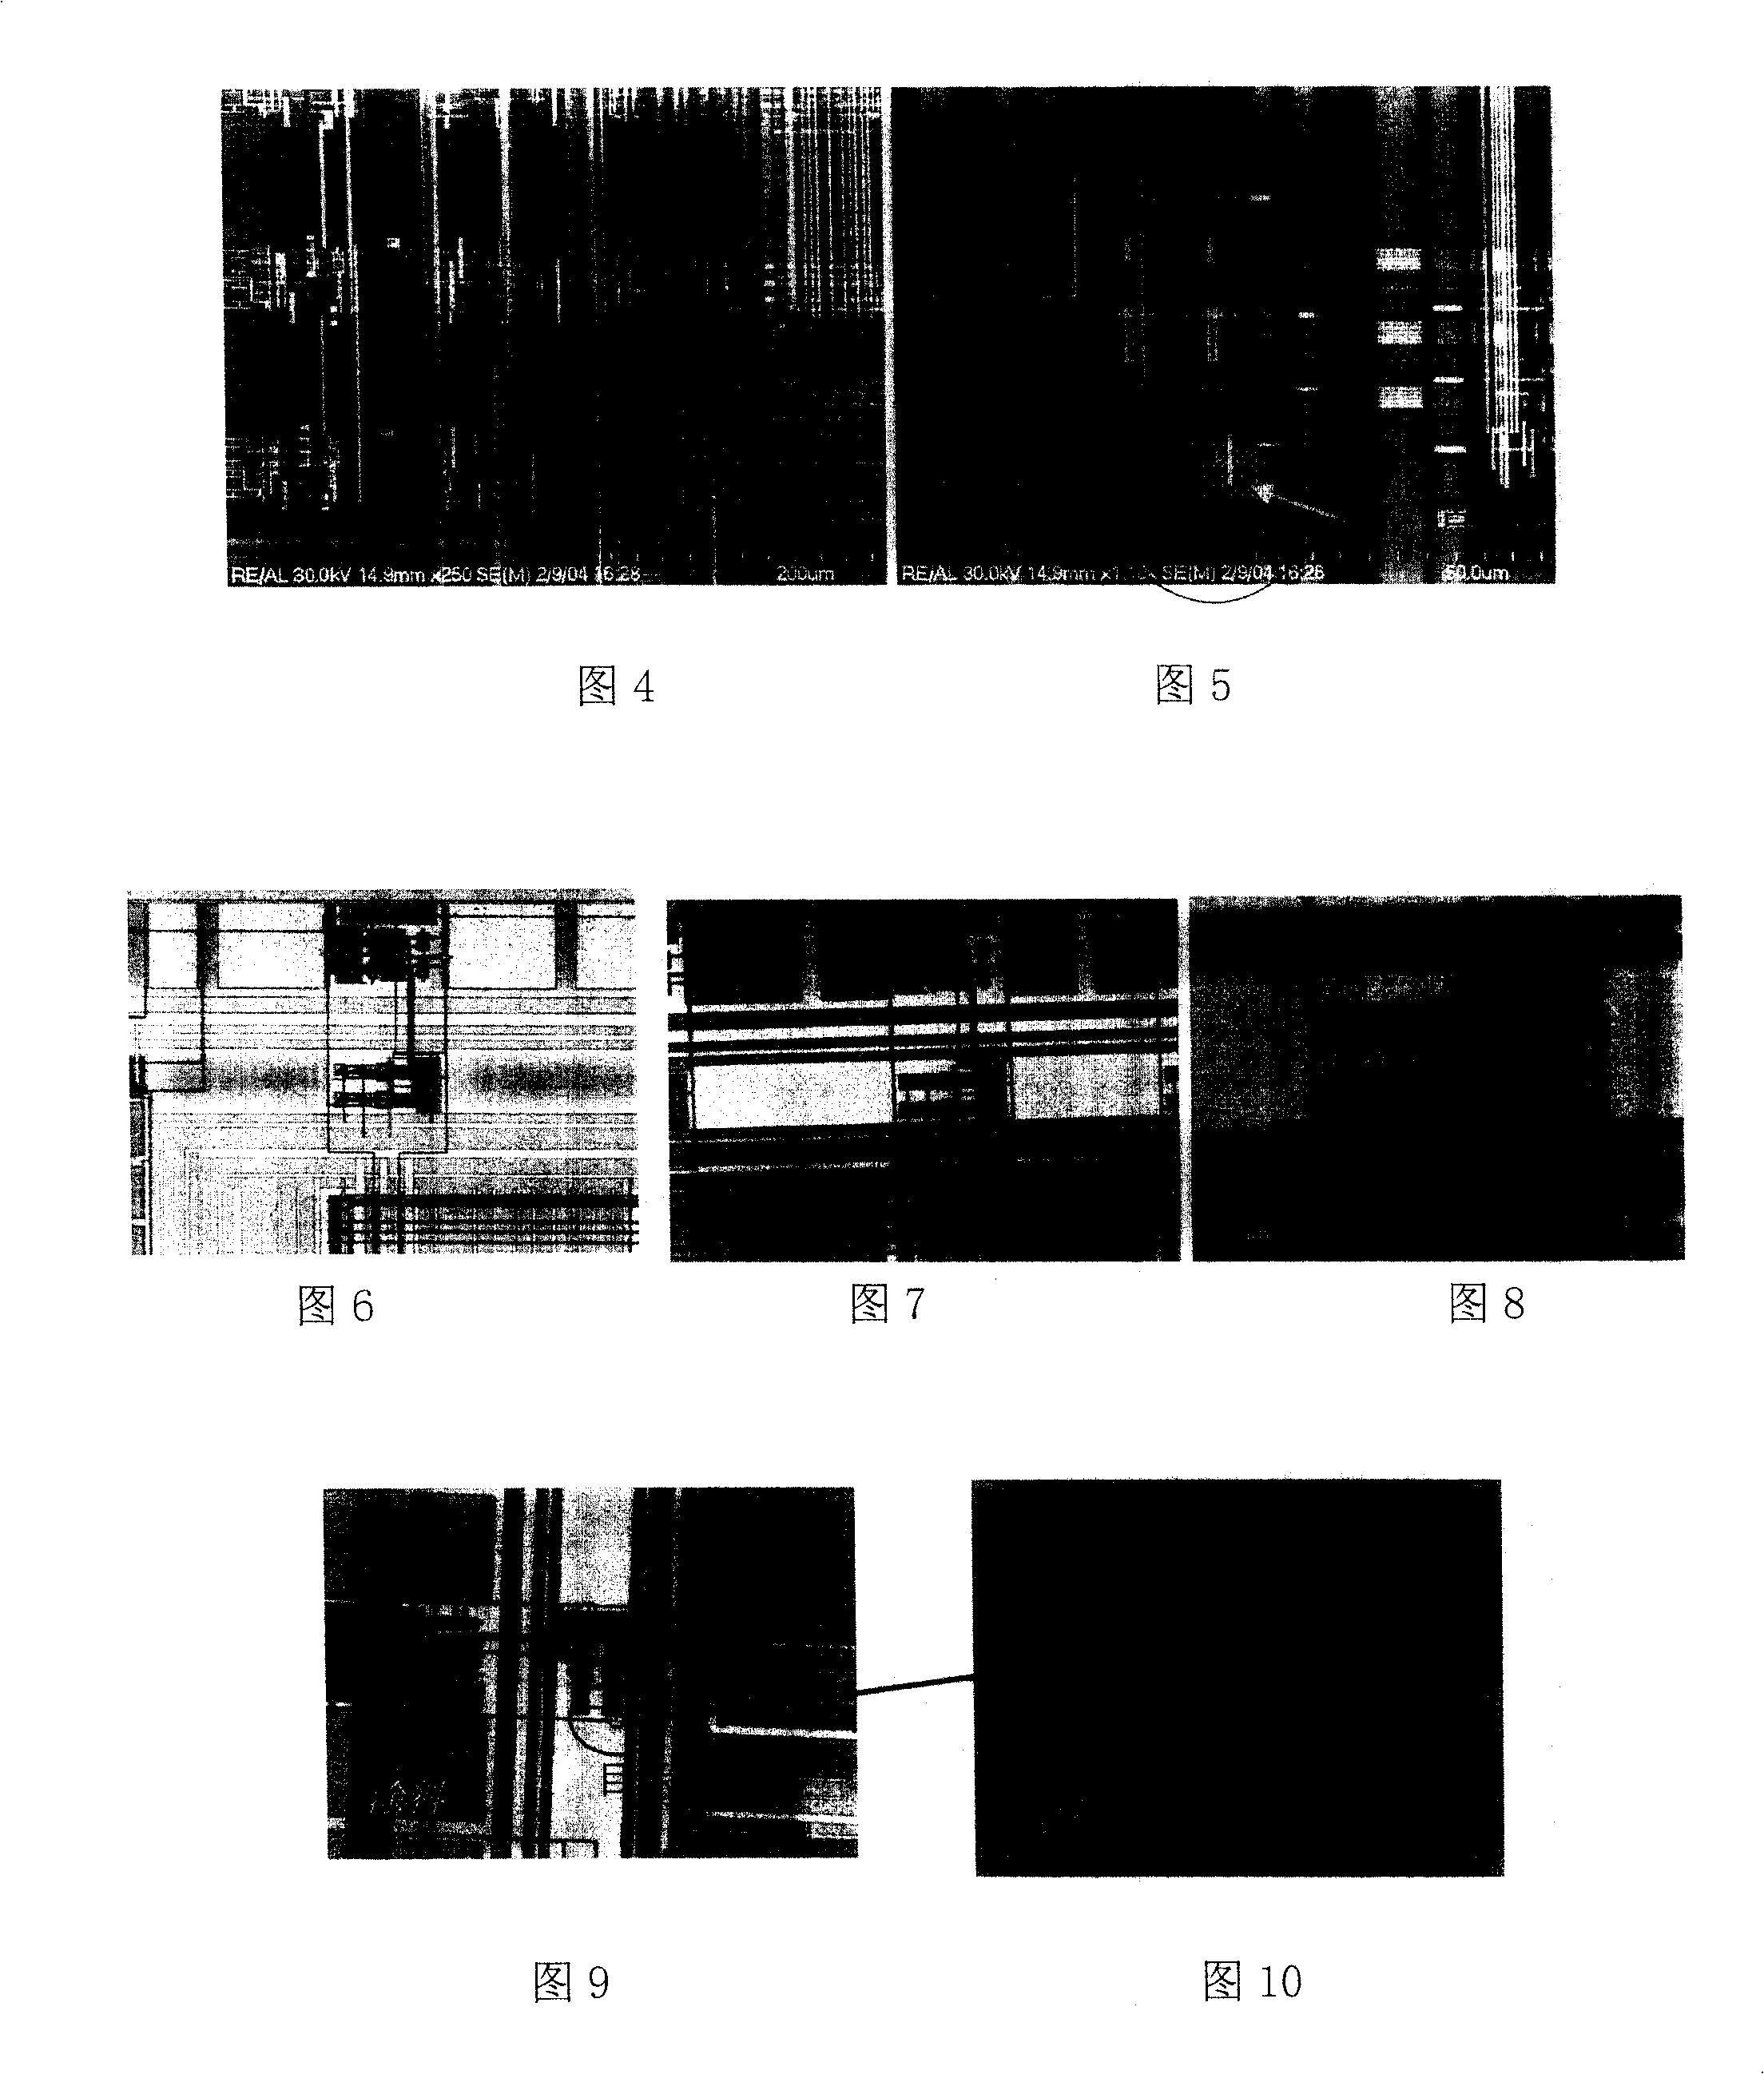 Method for focus plasma beam mending with precisivelly positioning